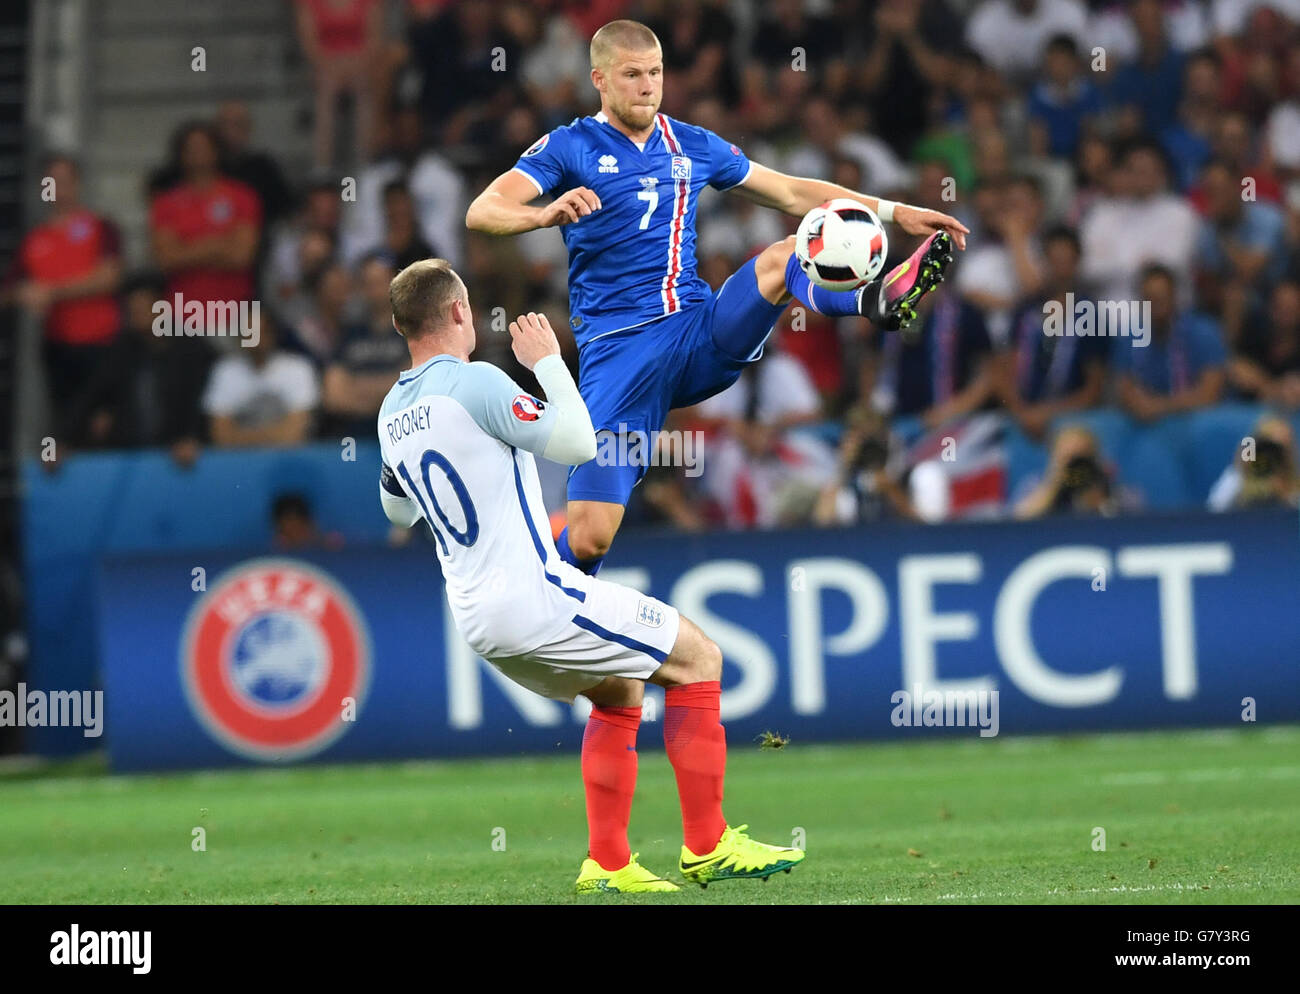 Nice, France. 27th June, 2016. Johann Berg Gudmundsson (R) of Iceland and Wayne Rooney of England vie for the ball during the UEFA EURO 2016 Round of 16 soccer match between England and Iceland at Stade de Nice in Nice, France, 27 June 2016. Photo: Federico Gambarini/dpa/Alamy Live News Stock Photo